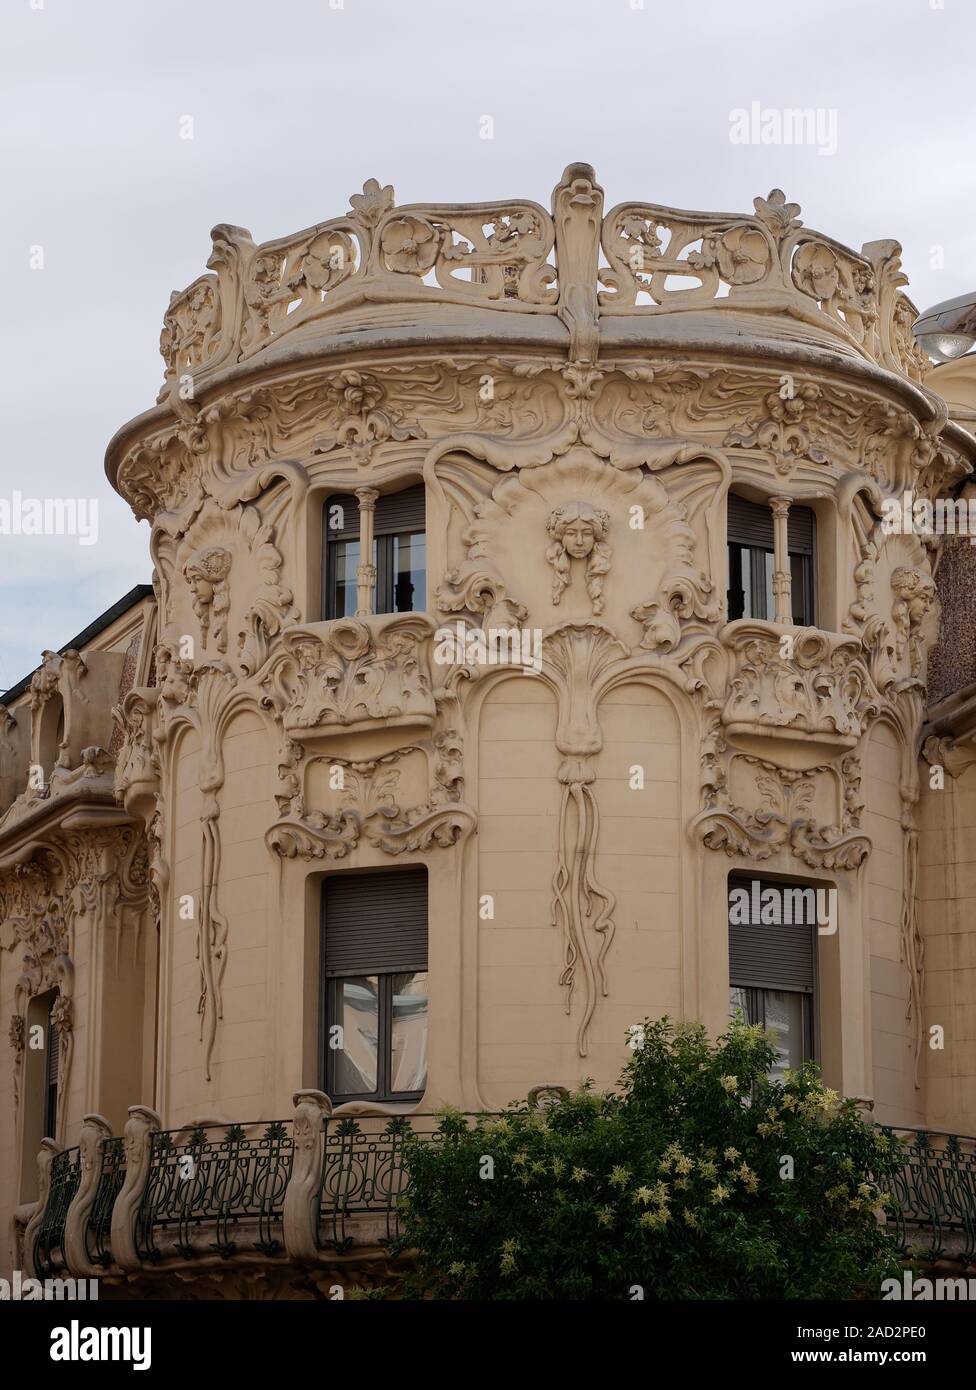 Close-up of the Palacio Longoria, a famous Art Nouveau palace, currently the headquarters of the Spanish Society of Authors (SGAE) Stock Photo